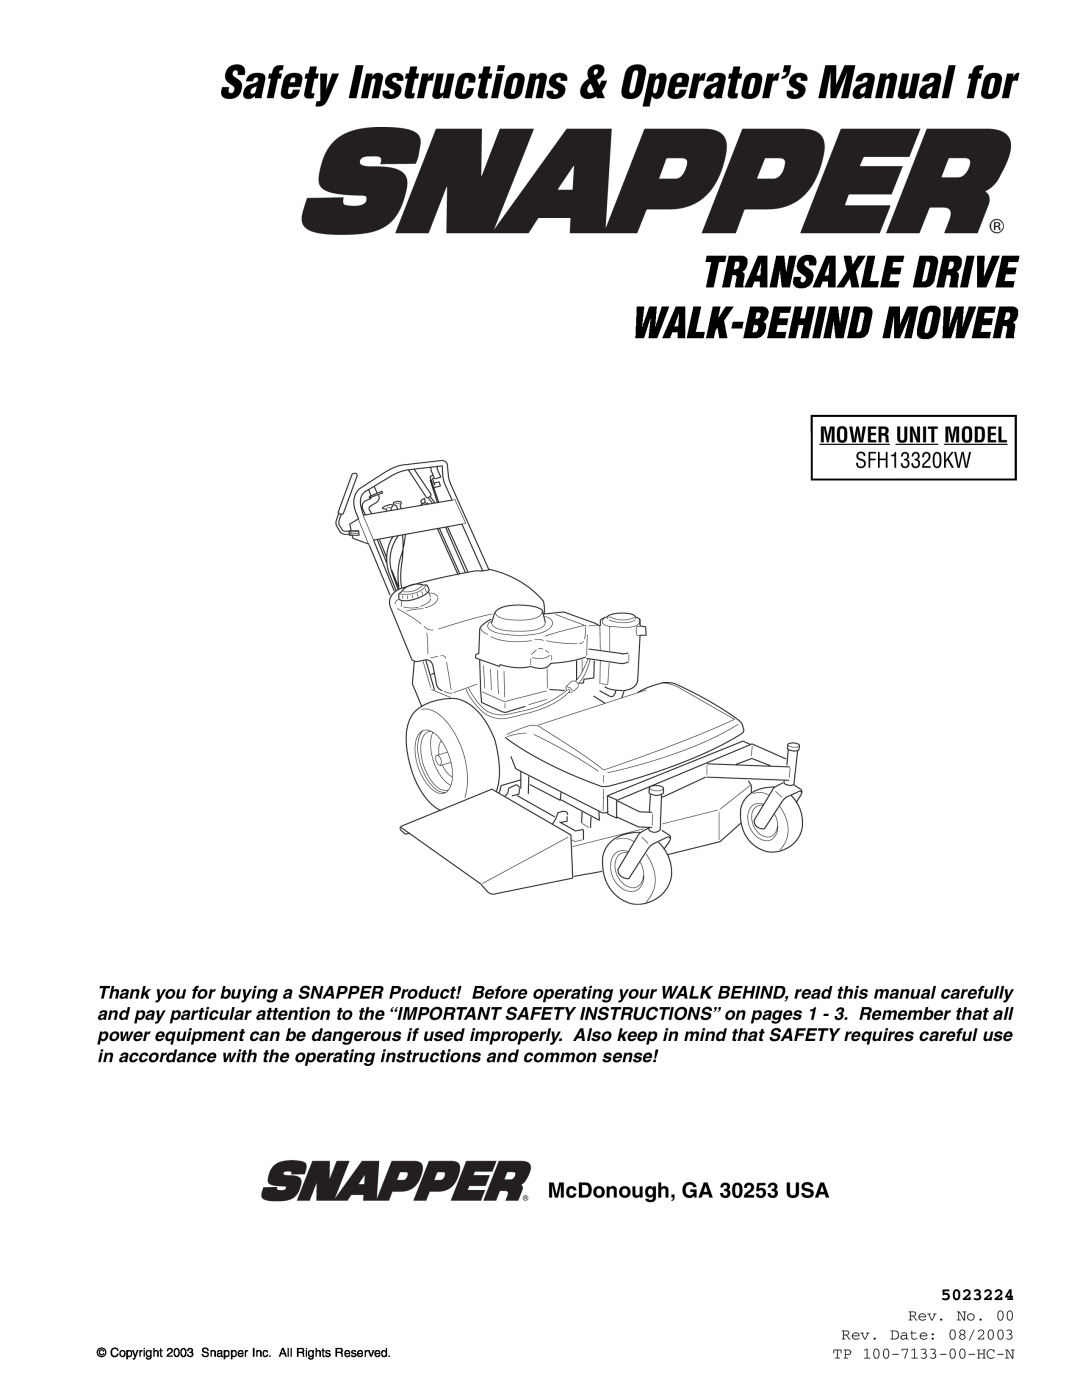 Snapper SFH13320KW important safety instructions Safety Instructions & Operator’s Manual for, Mower Unit Model, 5023224 